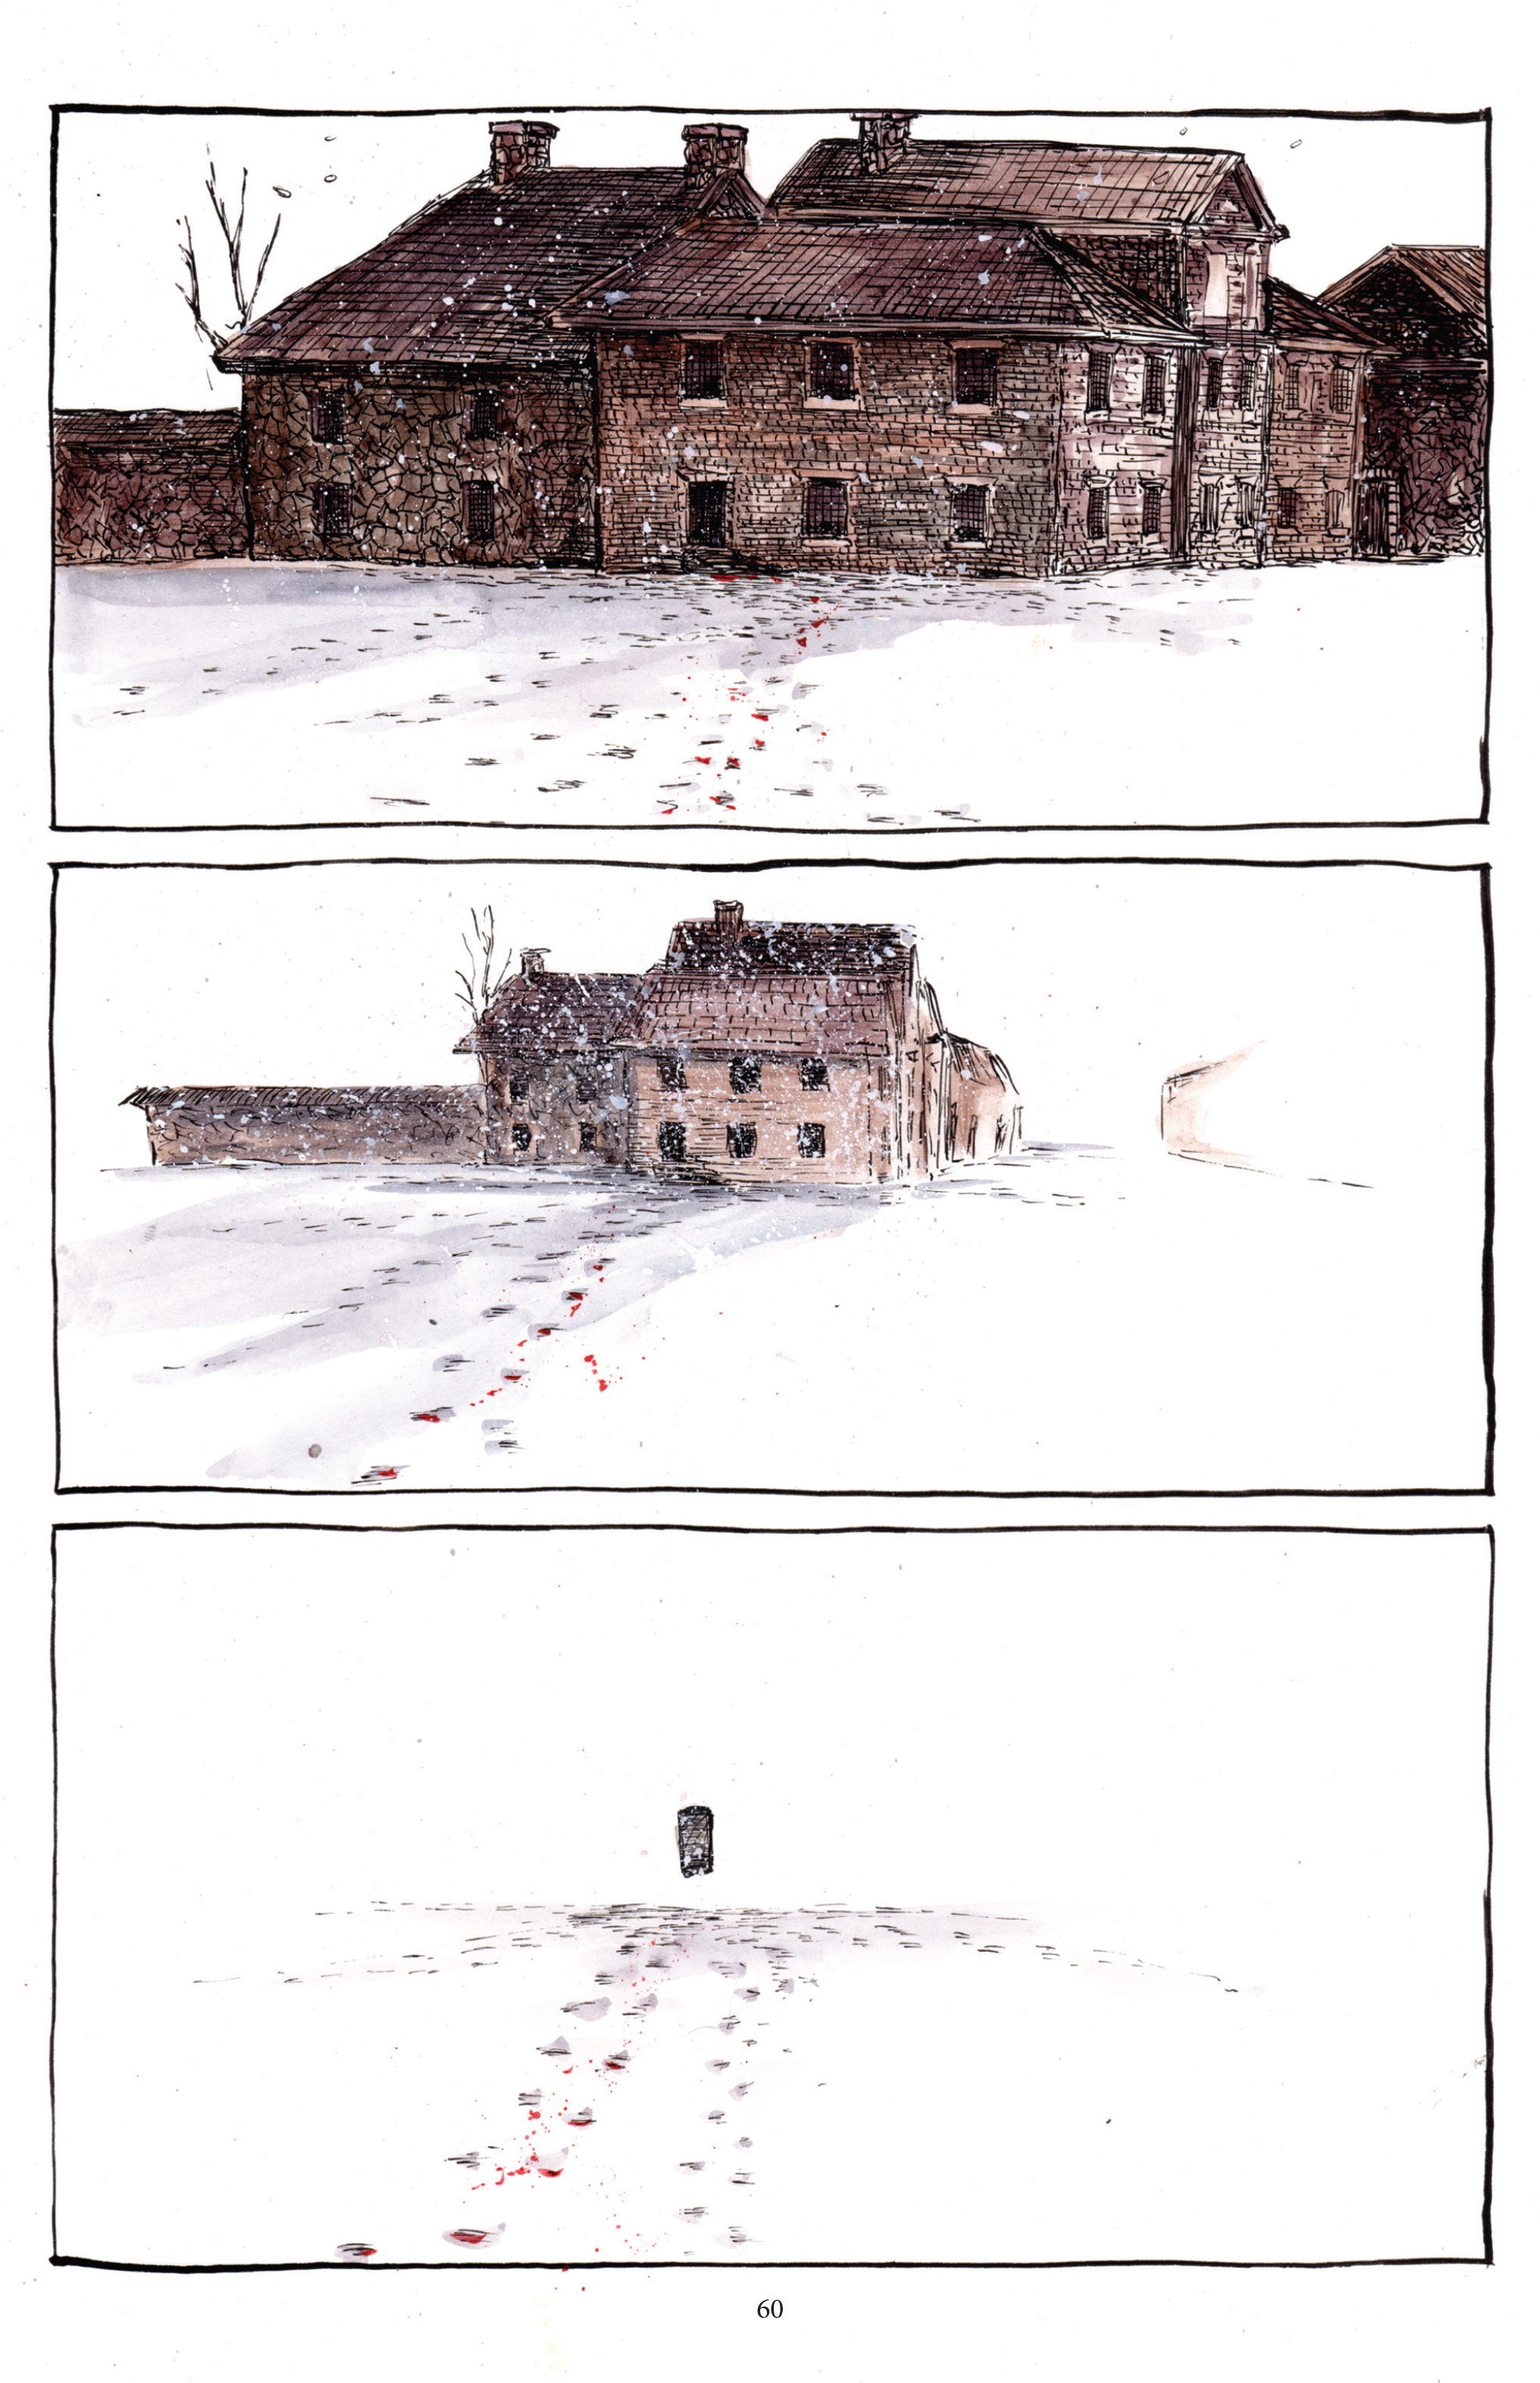 Three panels.  Panel One. Pan back to snow falling gently outside the workhouse, as if nothing is happening inside. There are shadows on the edges, though. Enough to remind us what is happening.  Panel Two. Pull back farther. More snow.  Panel Three. Even farther from the workhouse. The snow is very heavy.